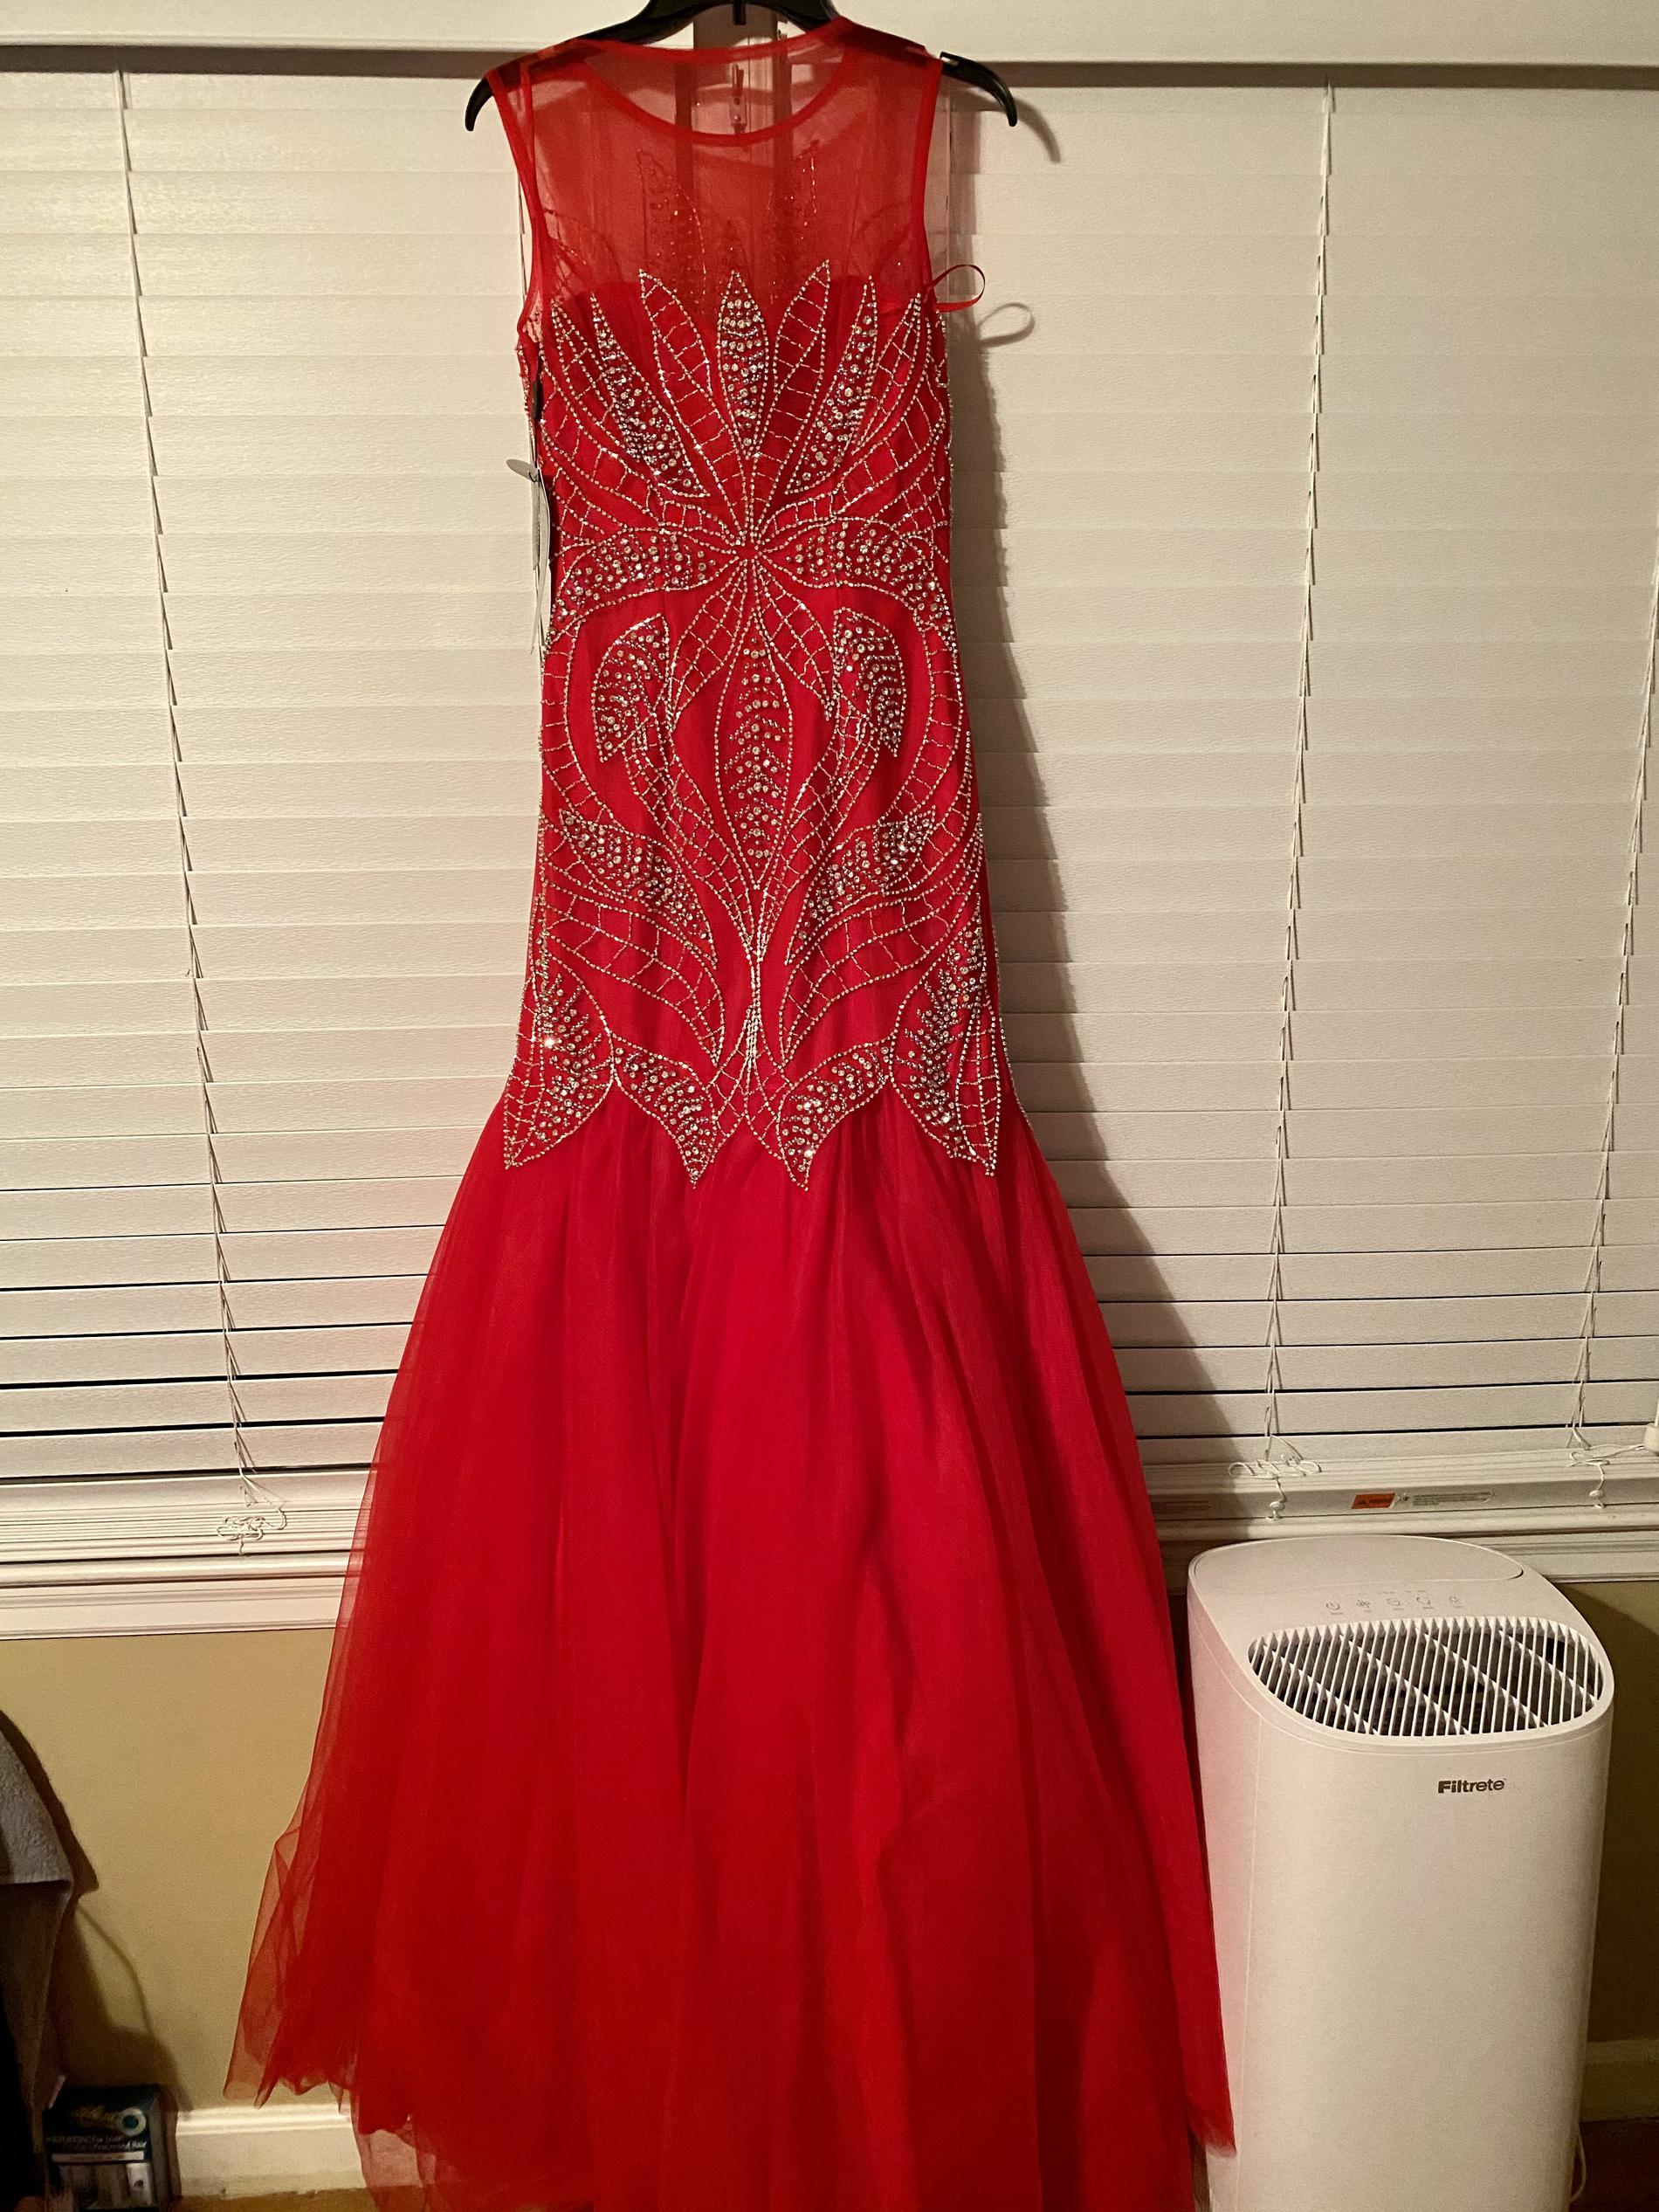 Gino Cerruti of London England Size 10 Red Mermaid Dress on Queenly